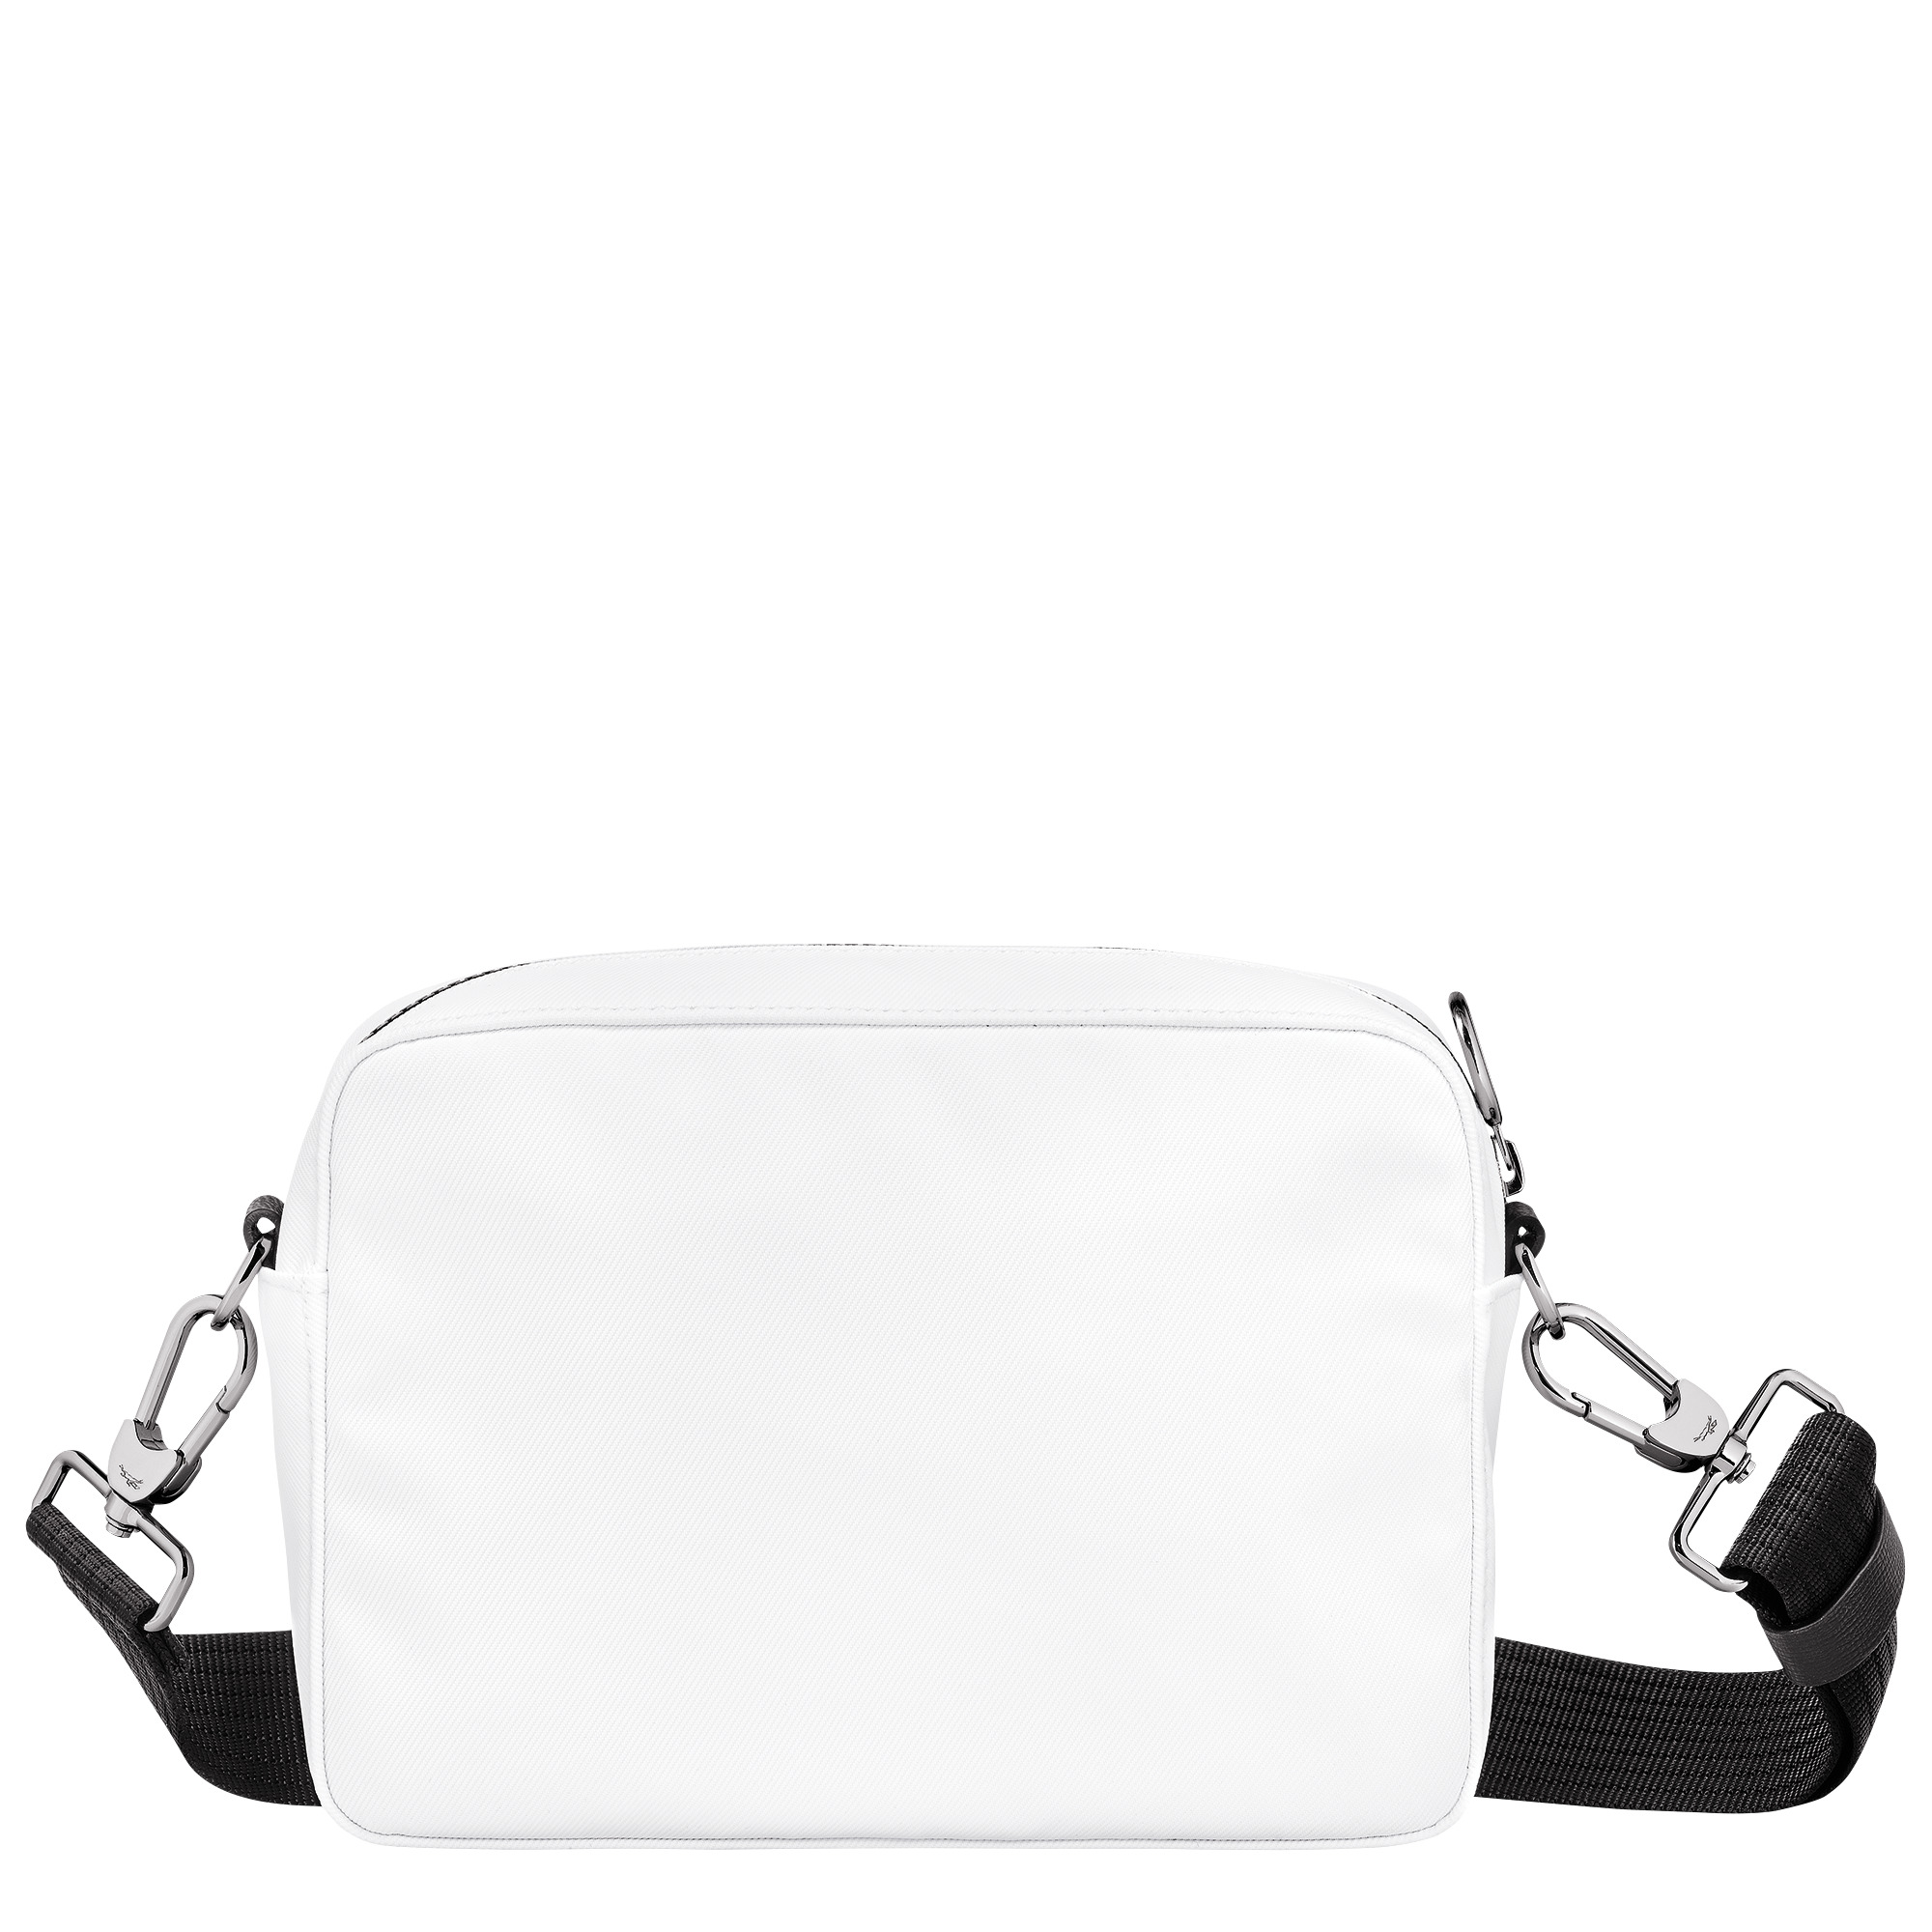 Le Pliage Energy S Camera bag White - Recycled canvas - 4